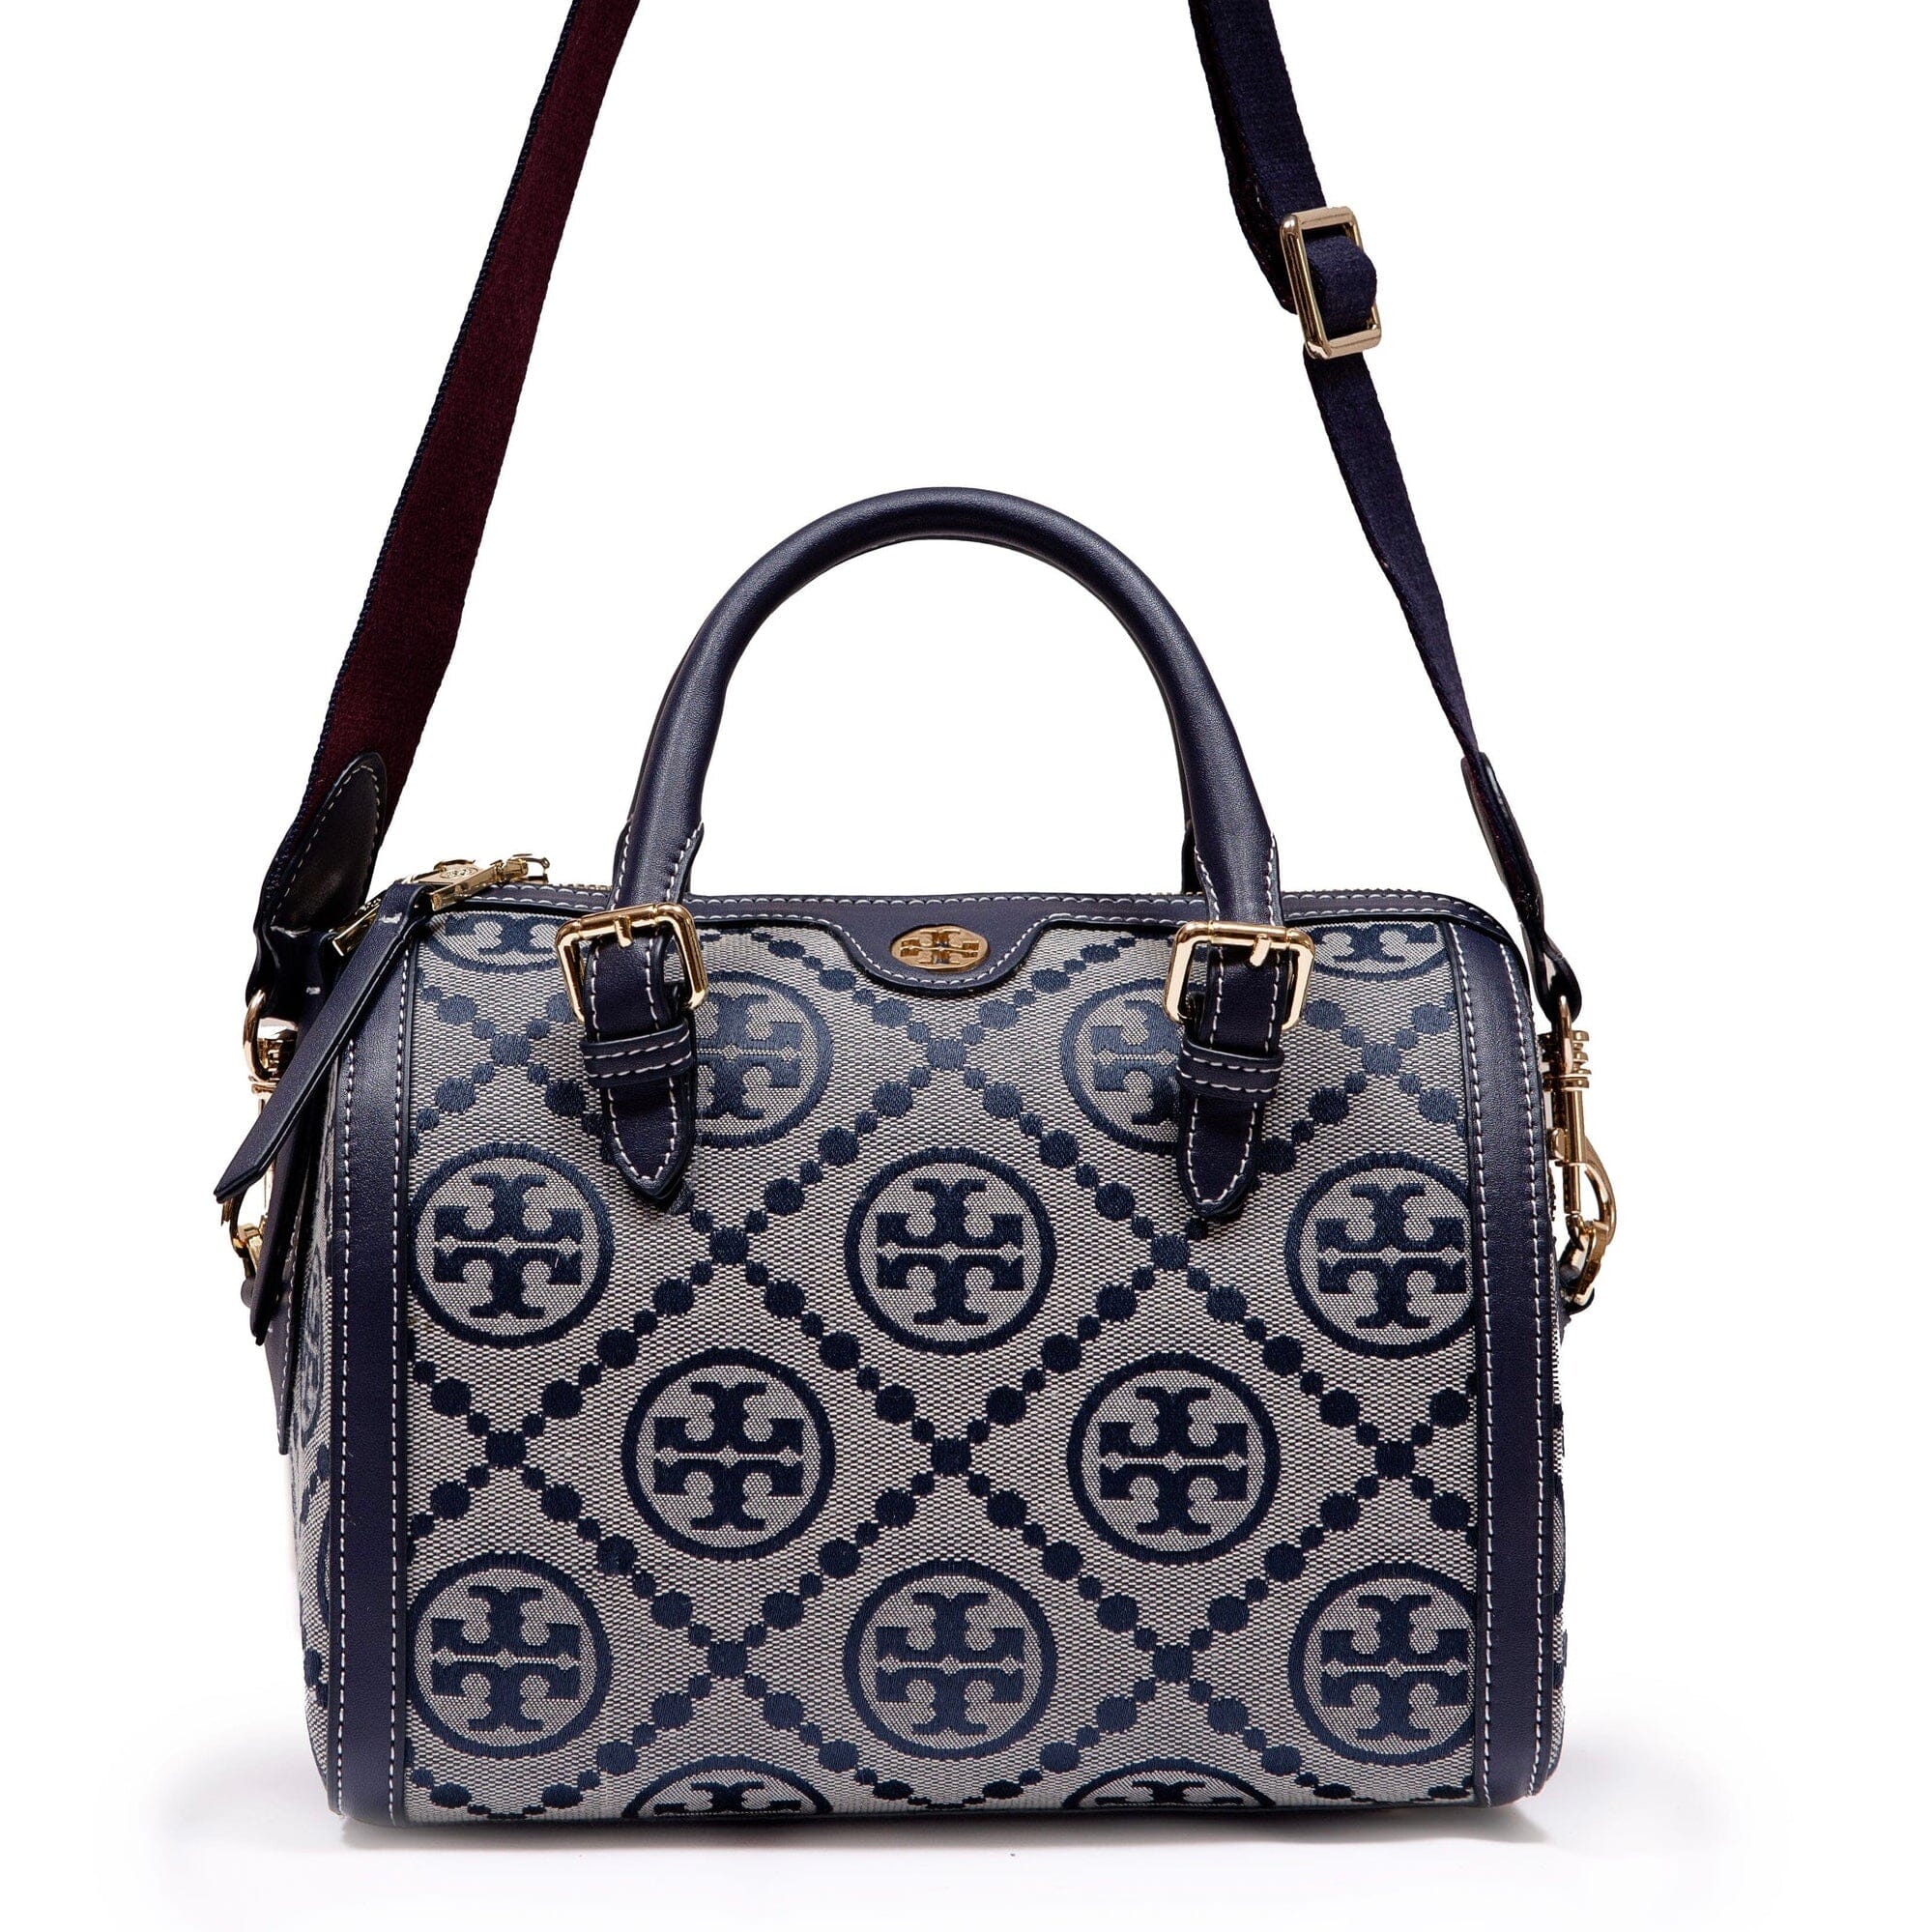 Tory Burch Tory Tote - Dark Fawn - Monkee's of the Pines